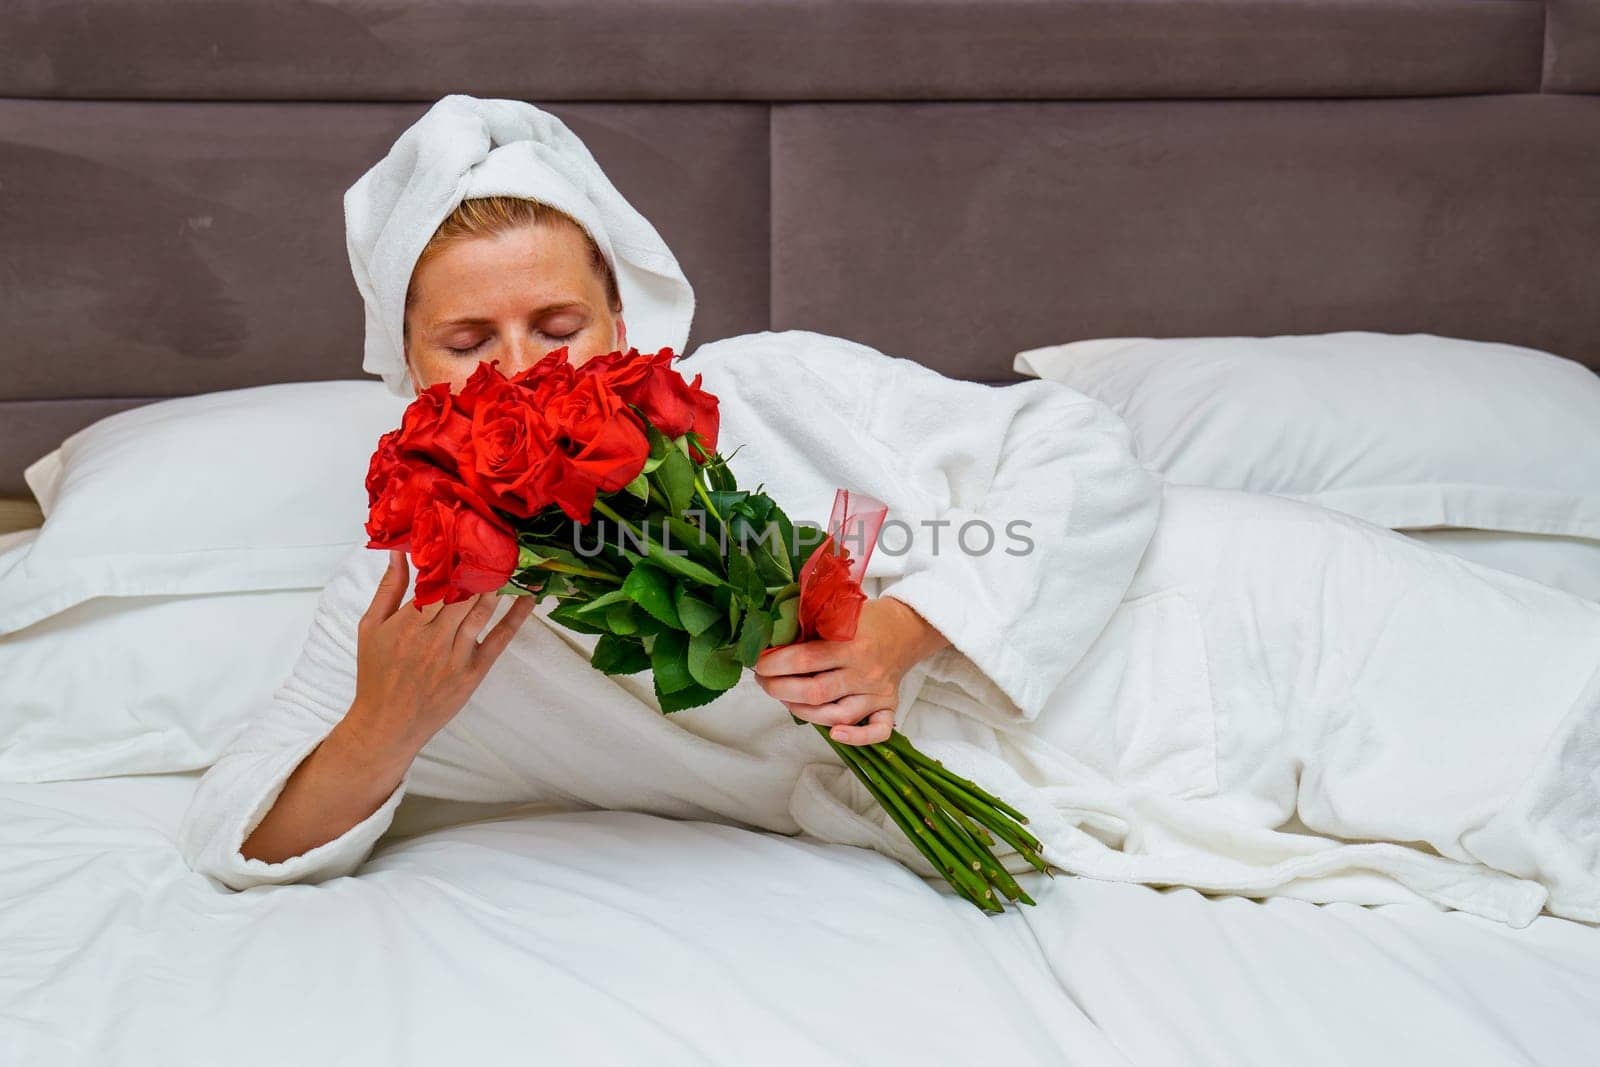 Tranquil romance: Gorgeous woman with a large bouquet of red roses resting on a hotel bed by PhotoTime